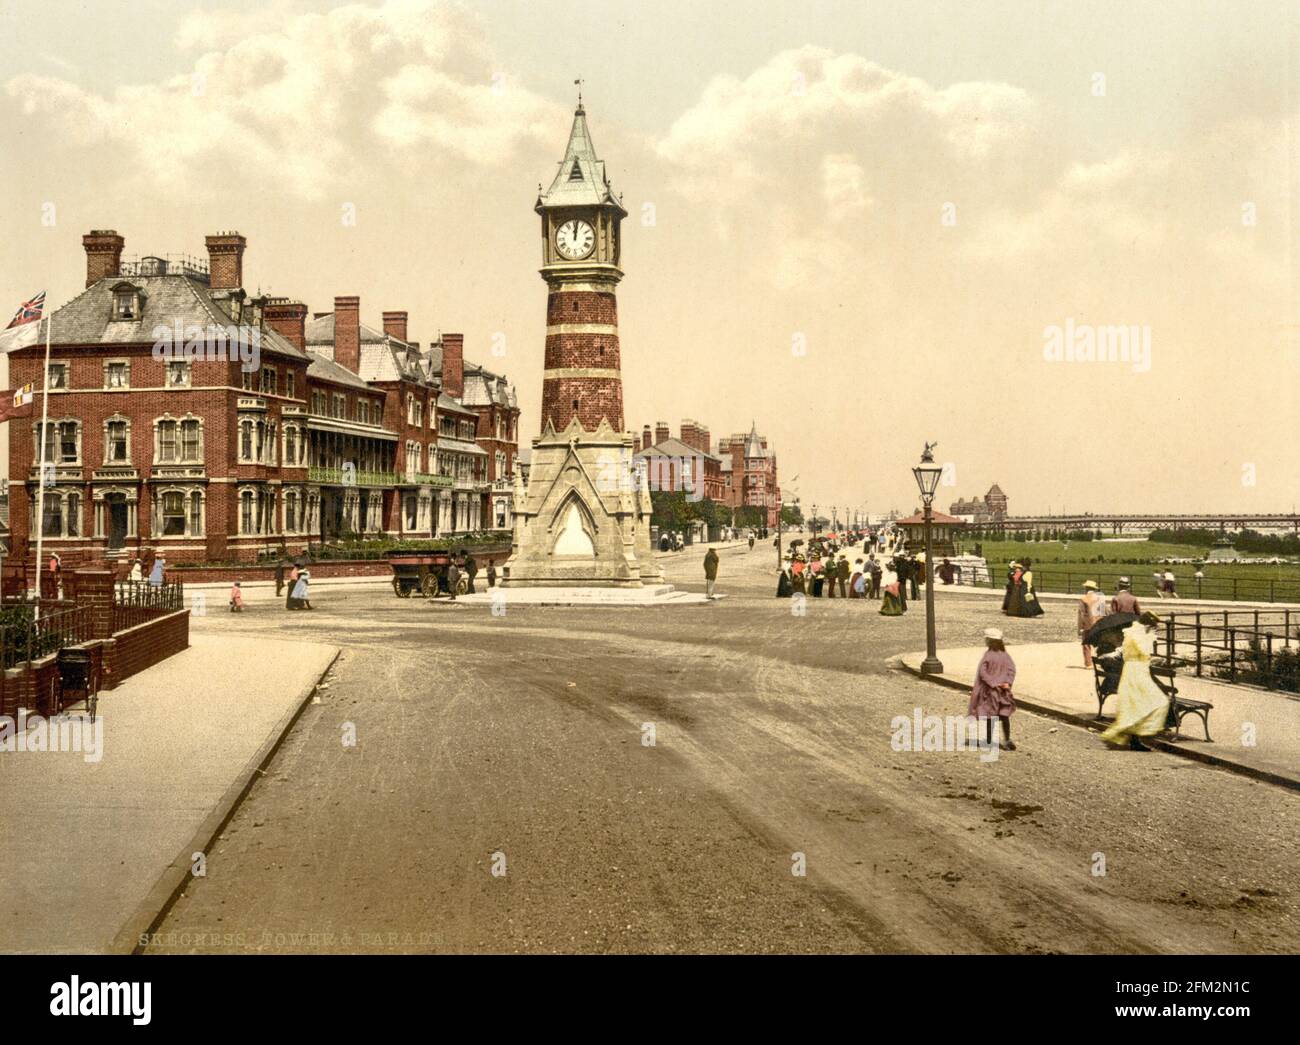 6 Victorian Views Skegness Promenade Pier Clock Tower Pictures New Old Photos 